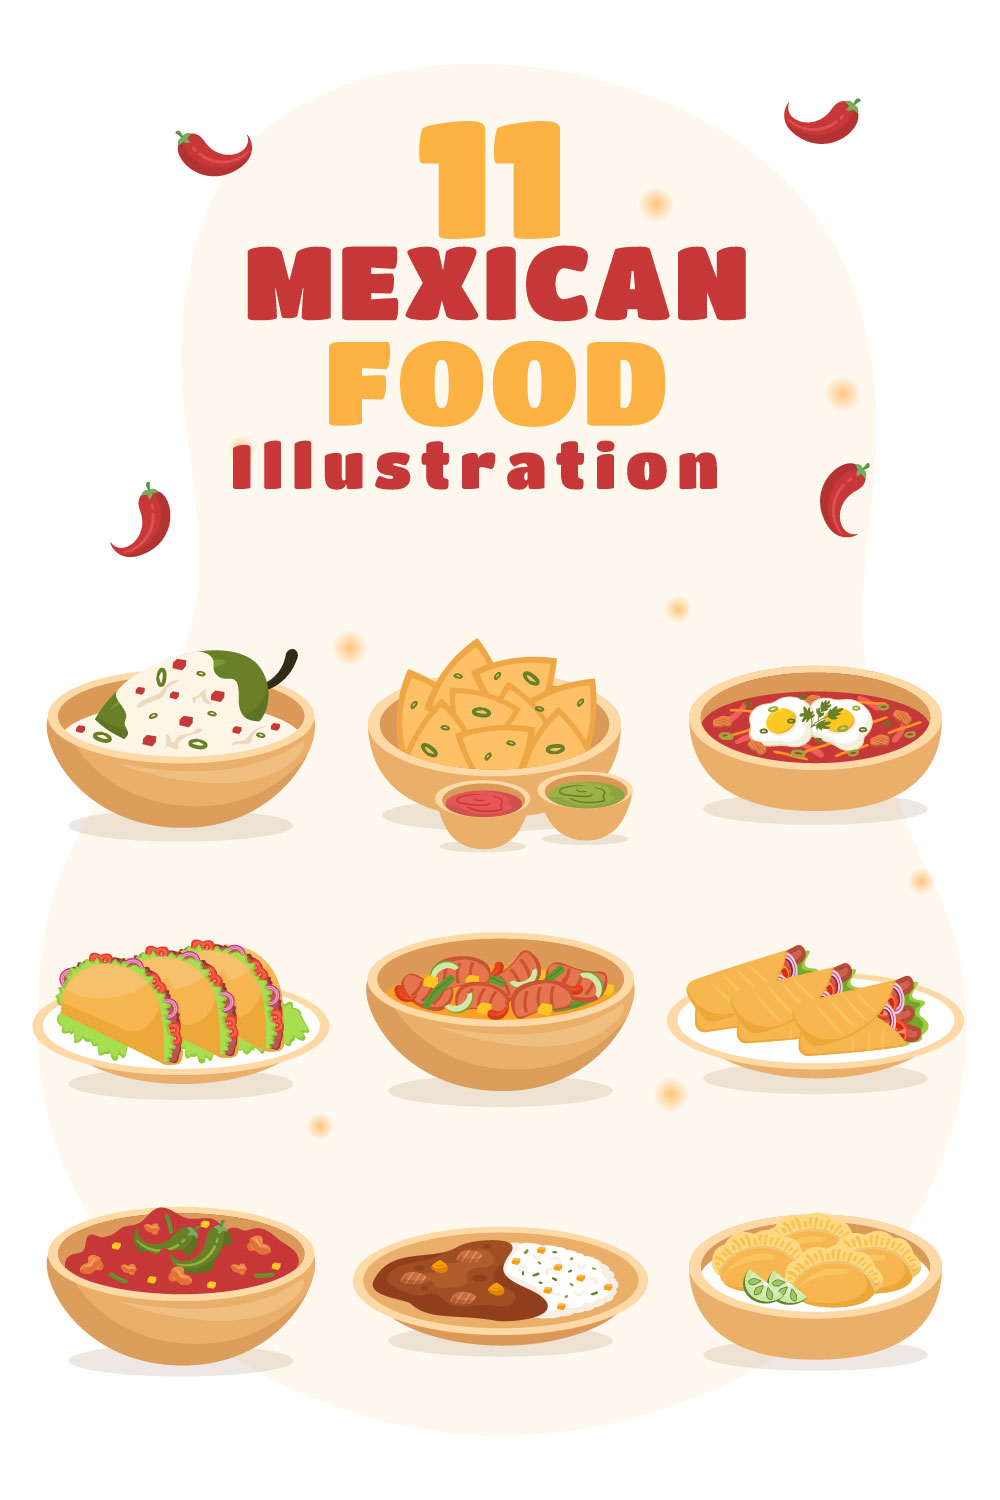 A pack of unique cartoon images of Mexican food.